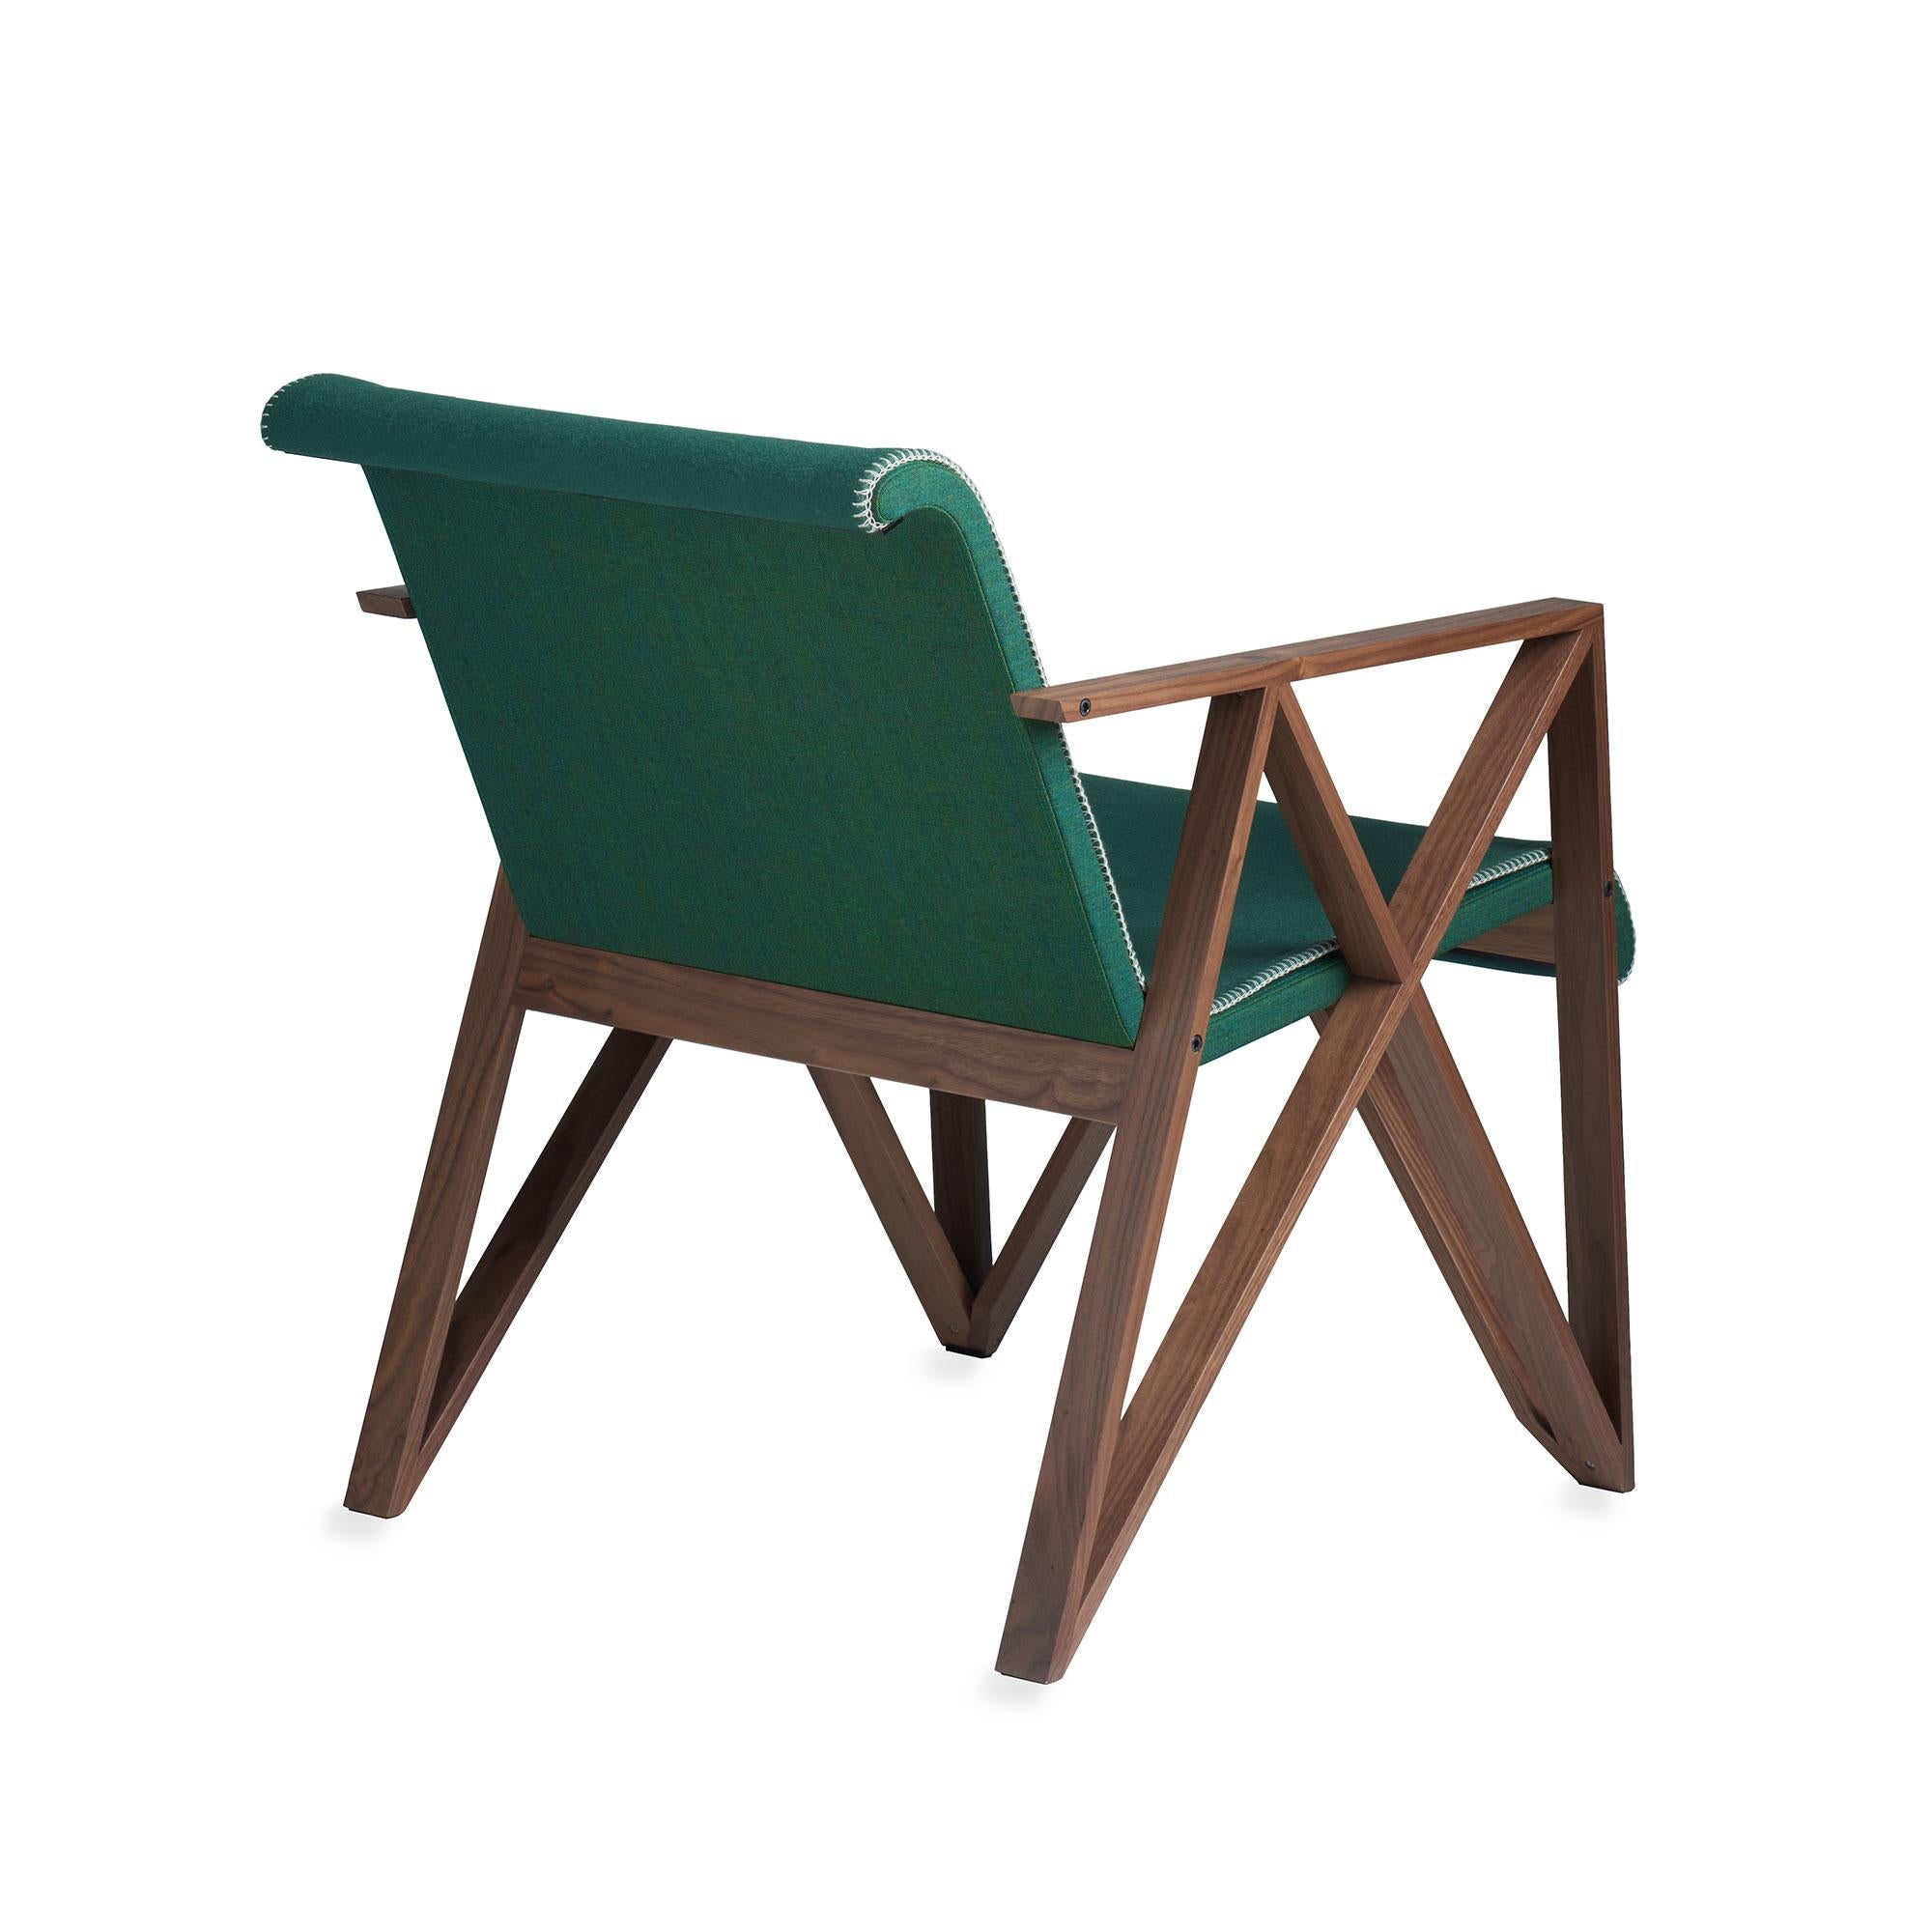 Stained Armchair for Metz&Co in Green Felt, Designed in 1958 by Gerrit Rietveld For Sale